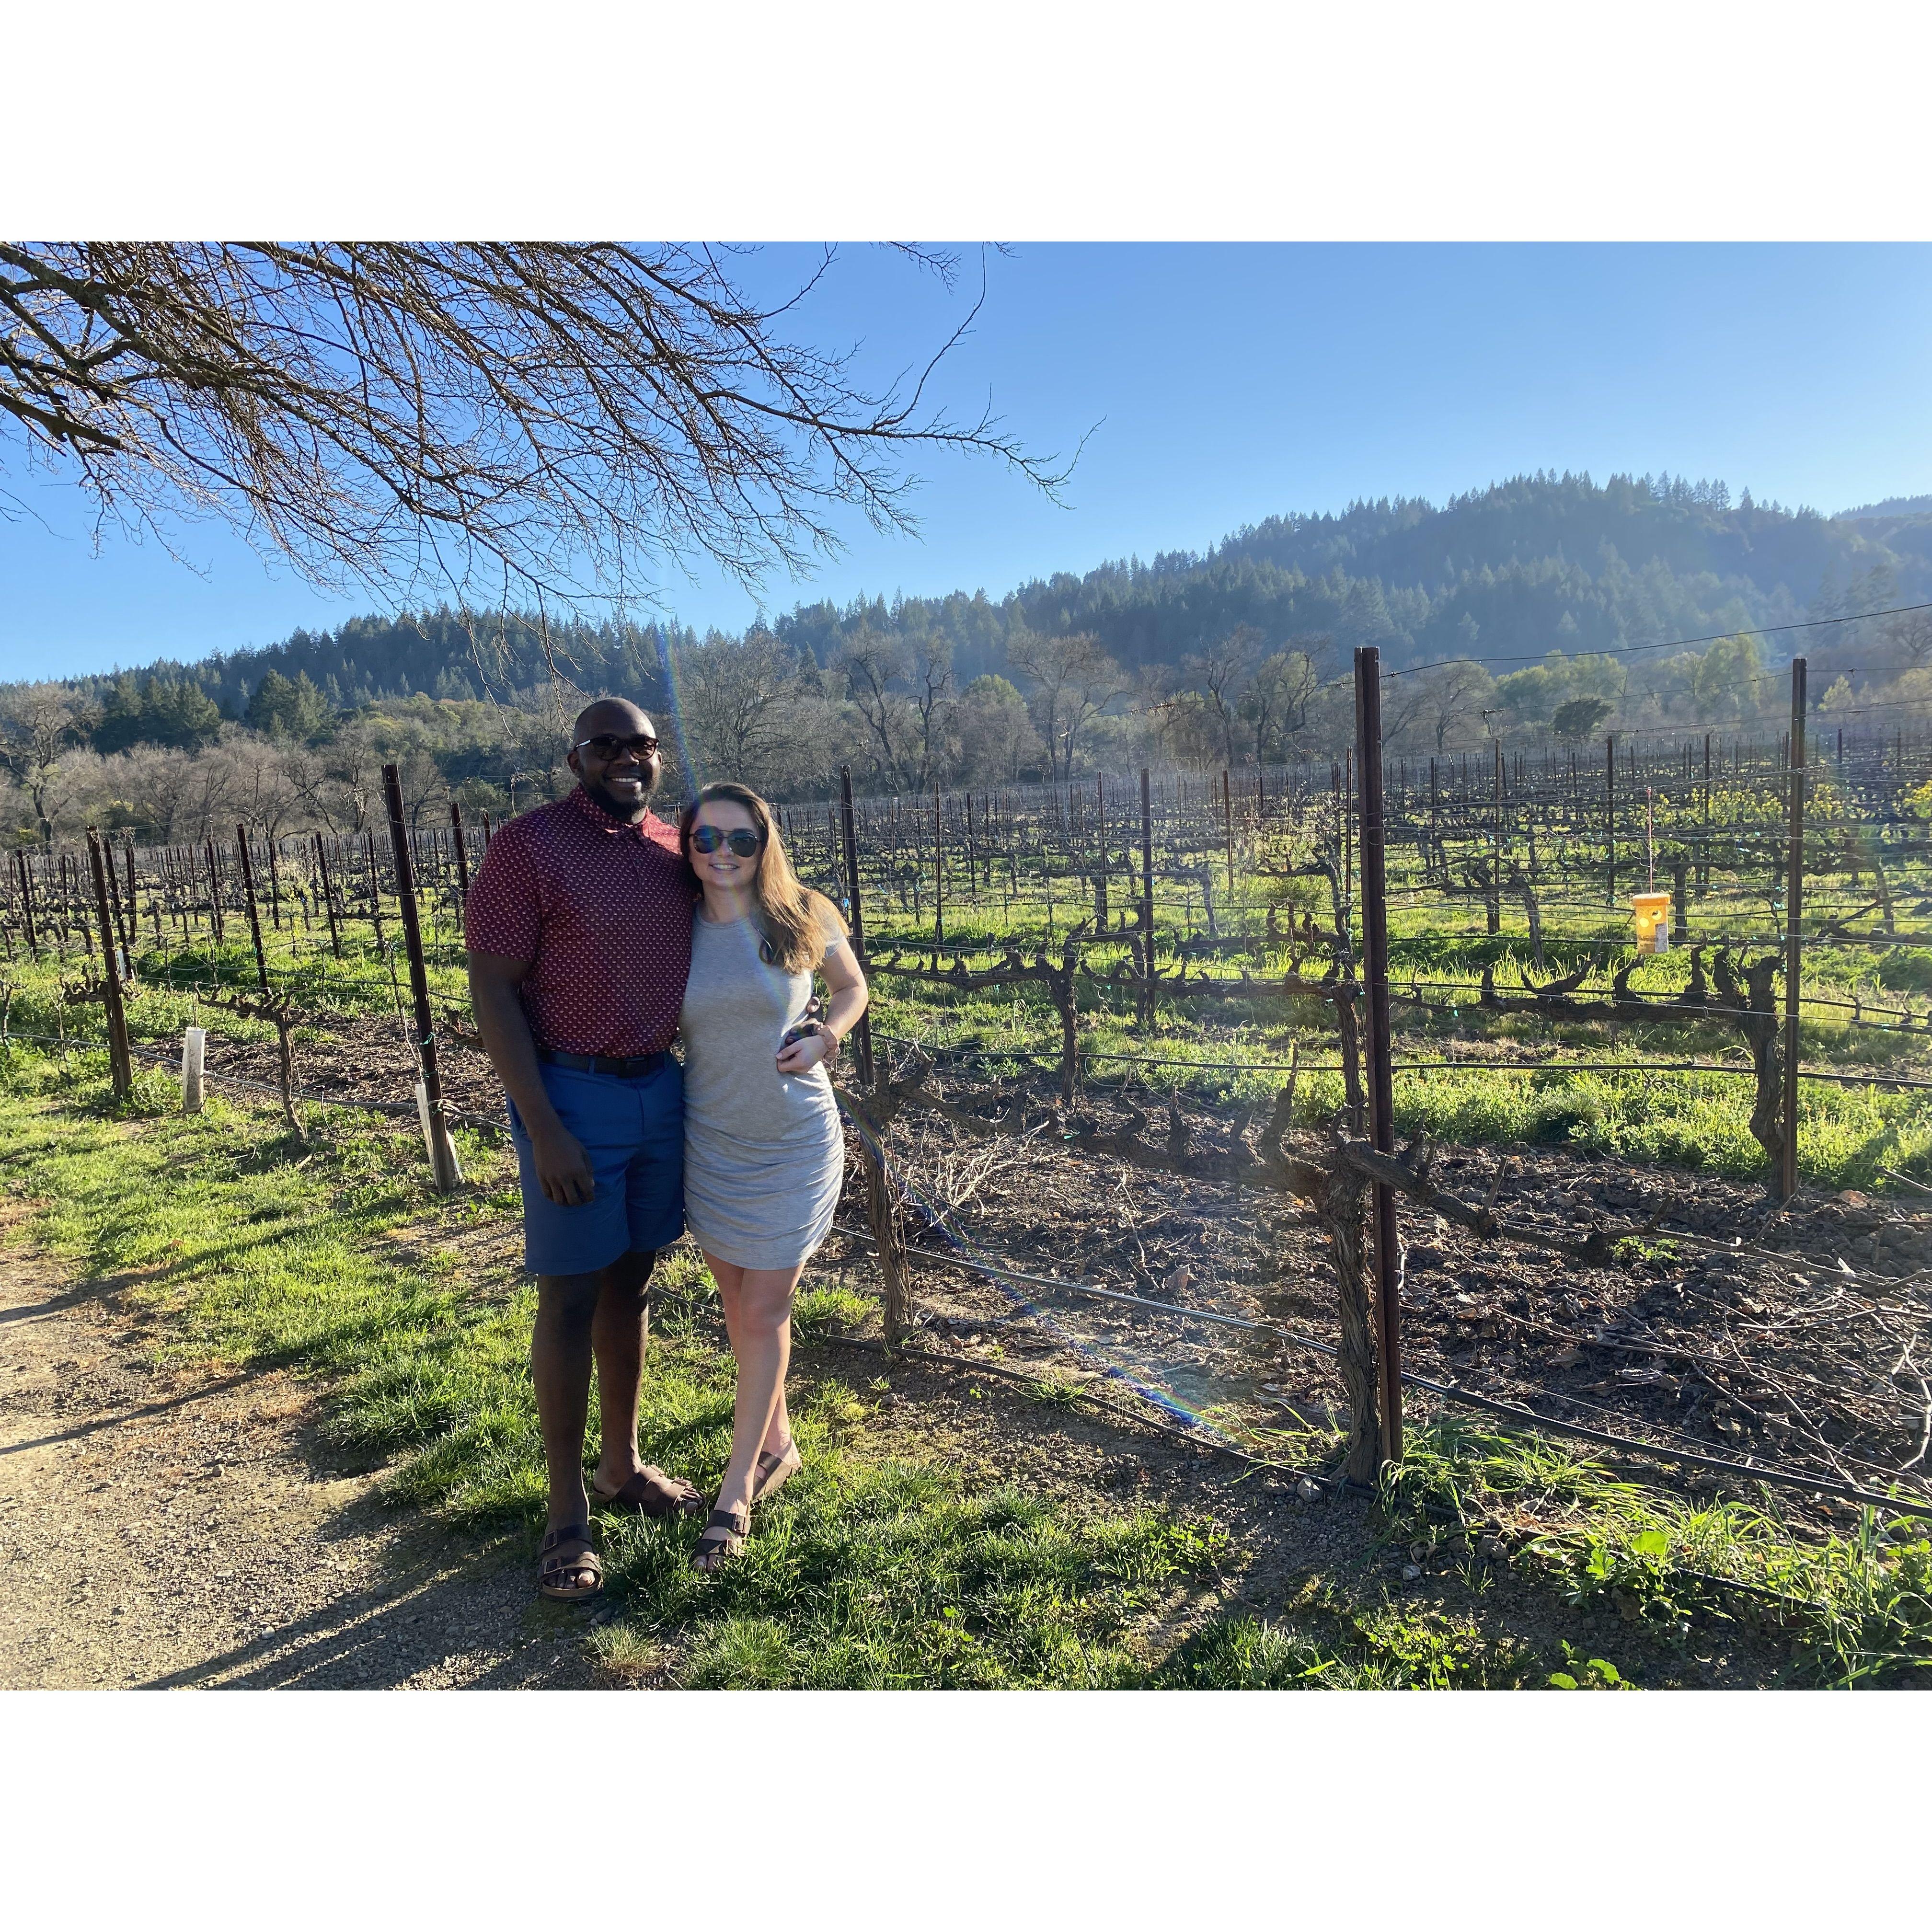 Our trip to Napa where we talked about getting married.